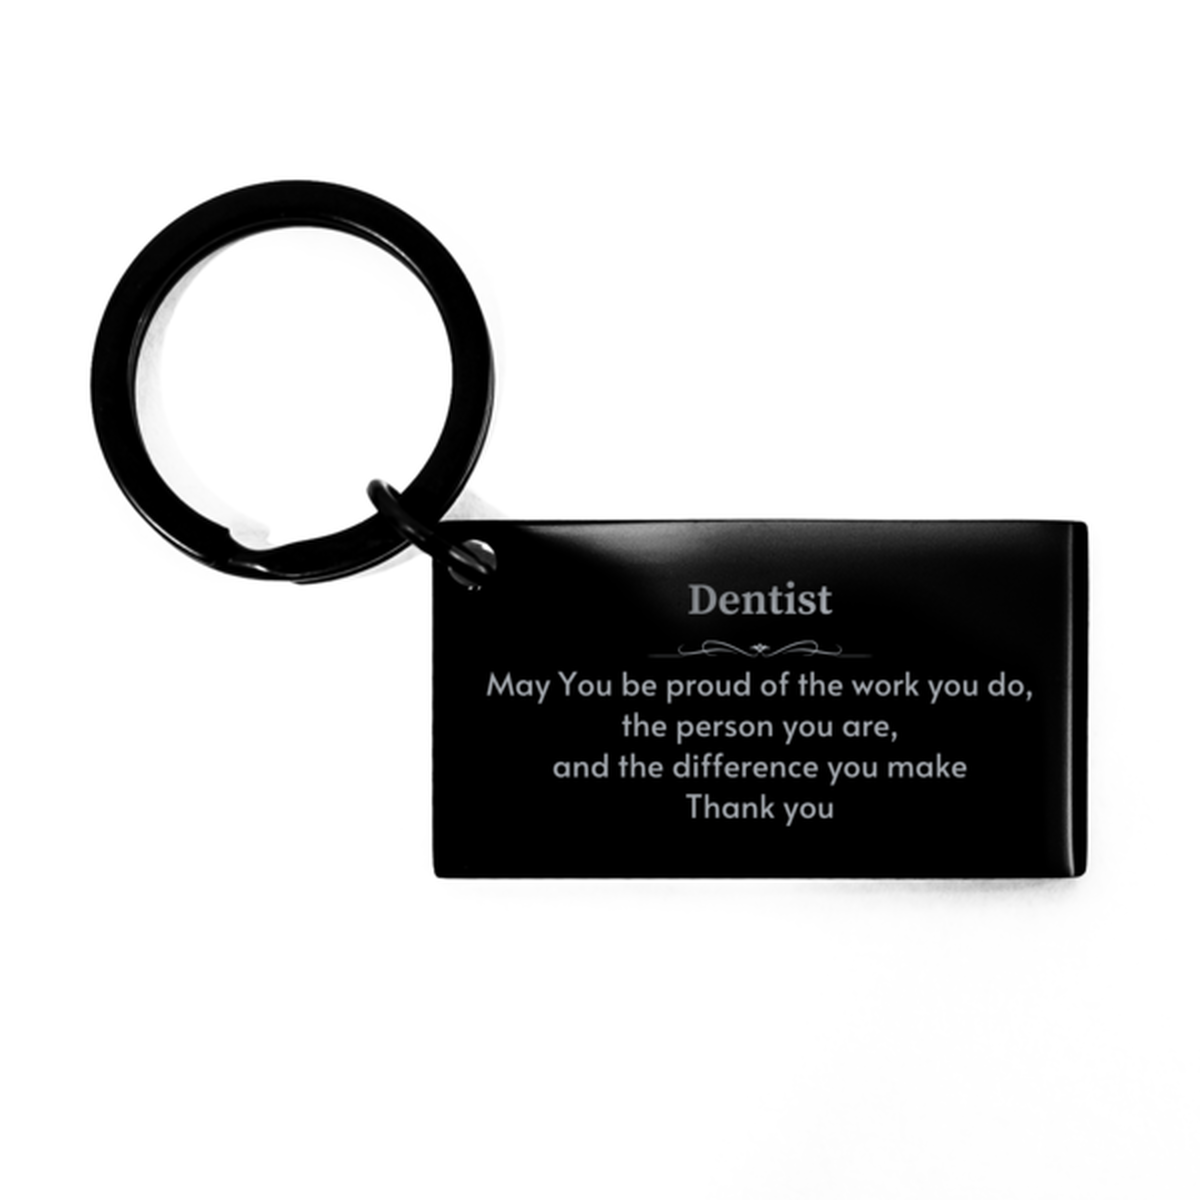 Heartwarming Keychain Retirement Coworkers Gifts for Dentist, General Manager May You be proud of the work you do, the person you are Gifts for Boss Men Women Friends